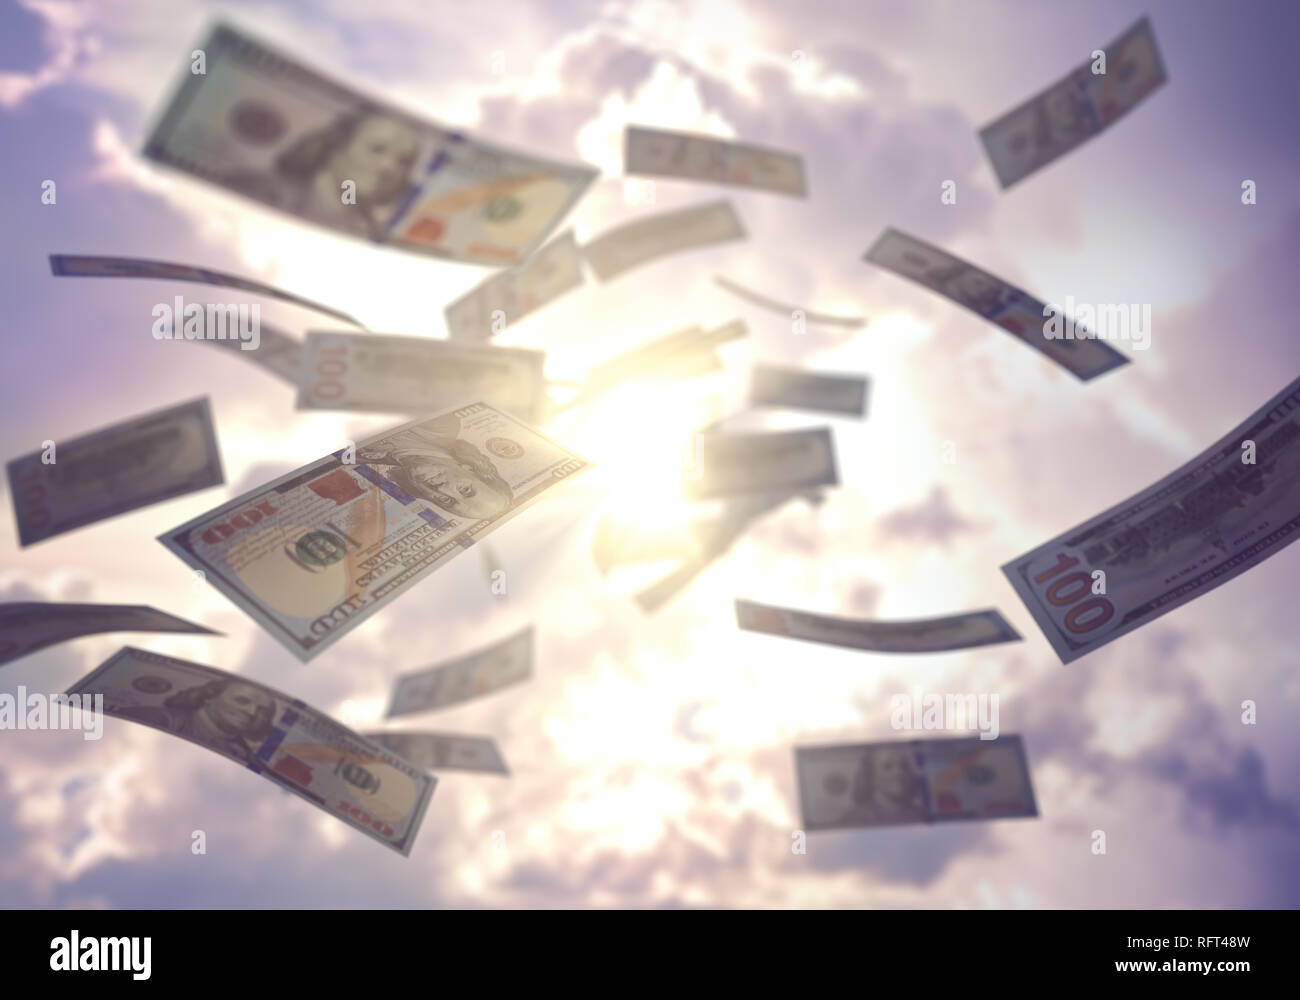 Raining money from the sky, American dollar bills falling everywhere. Concept of wealth, making easy money, without difficulty. Stock Photo